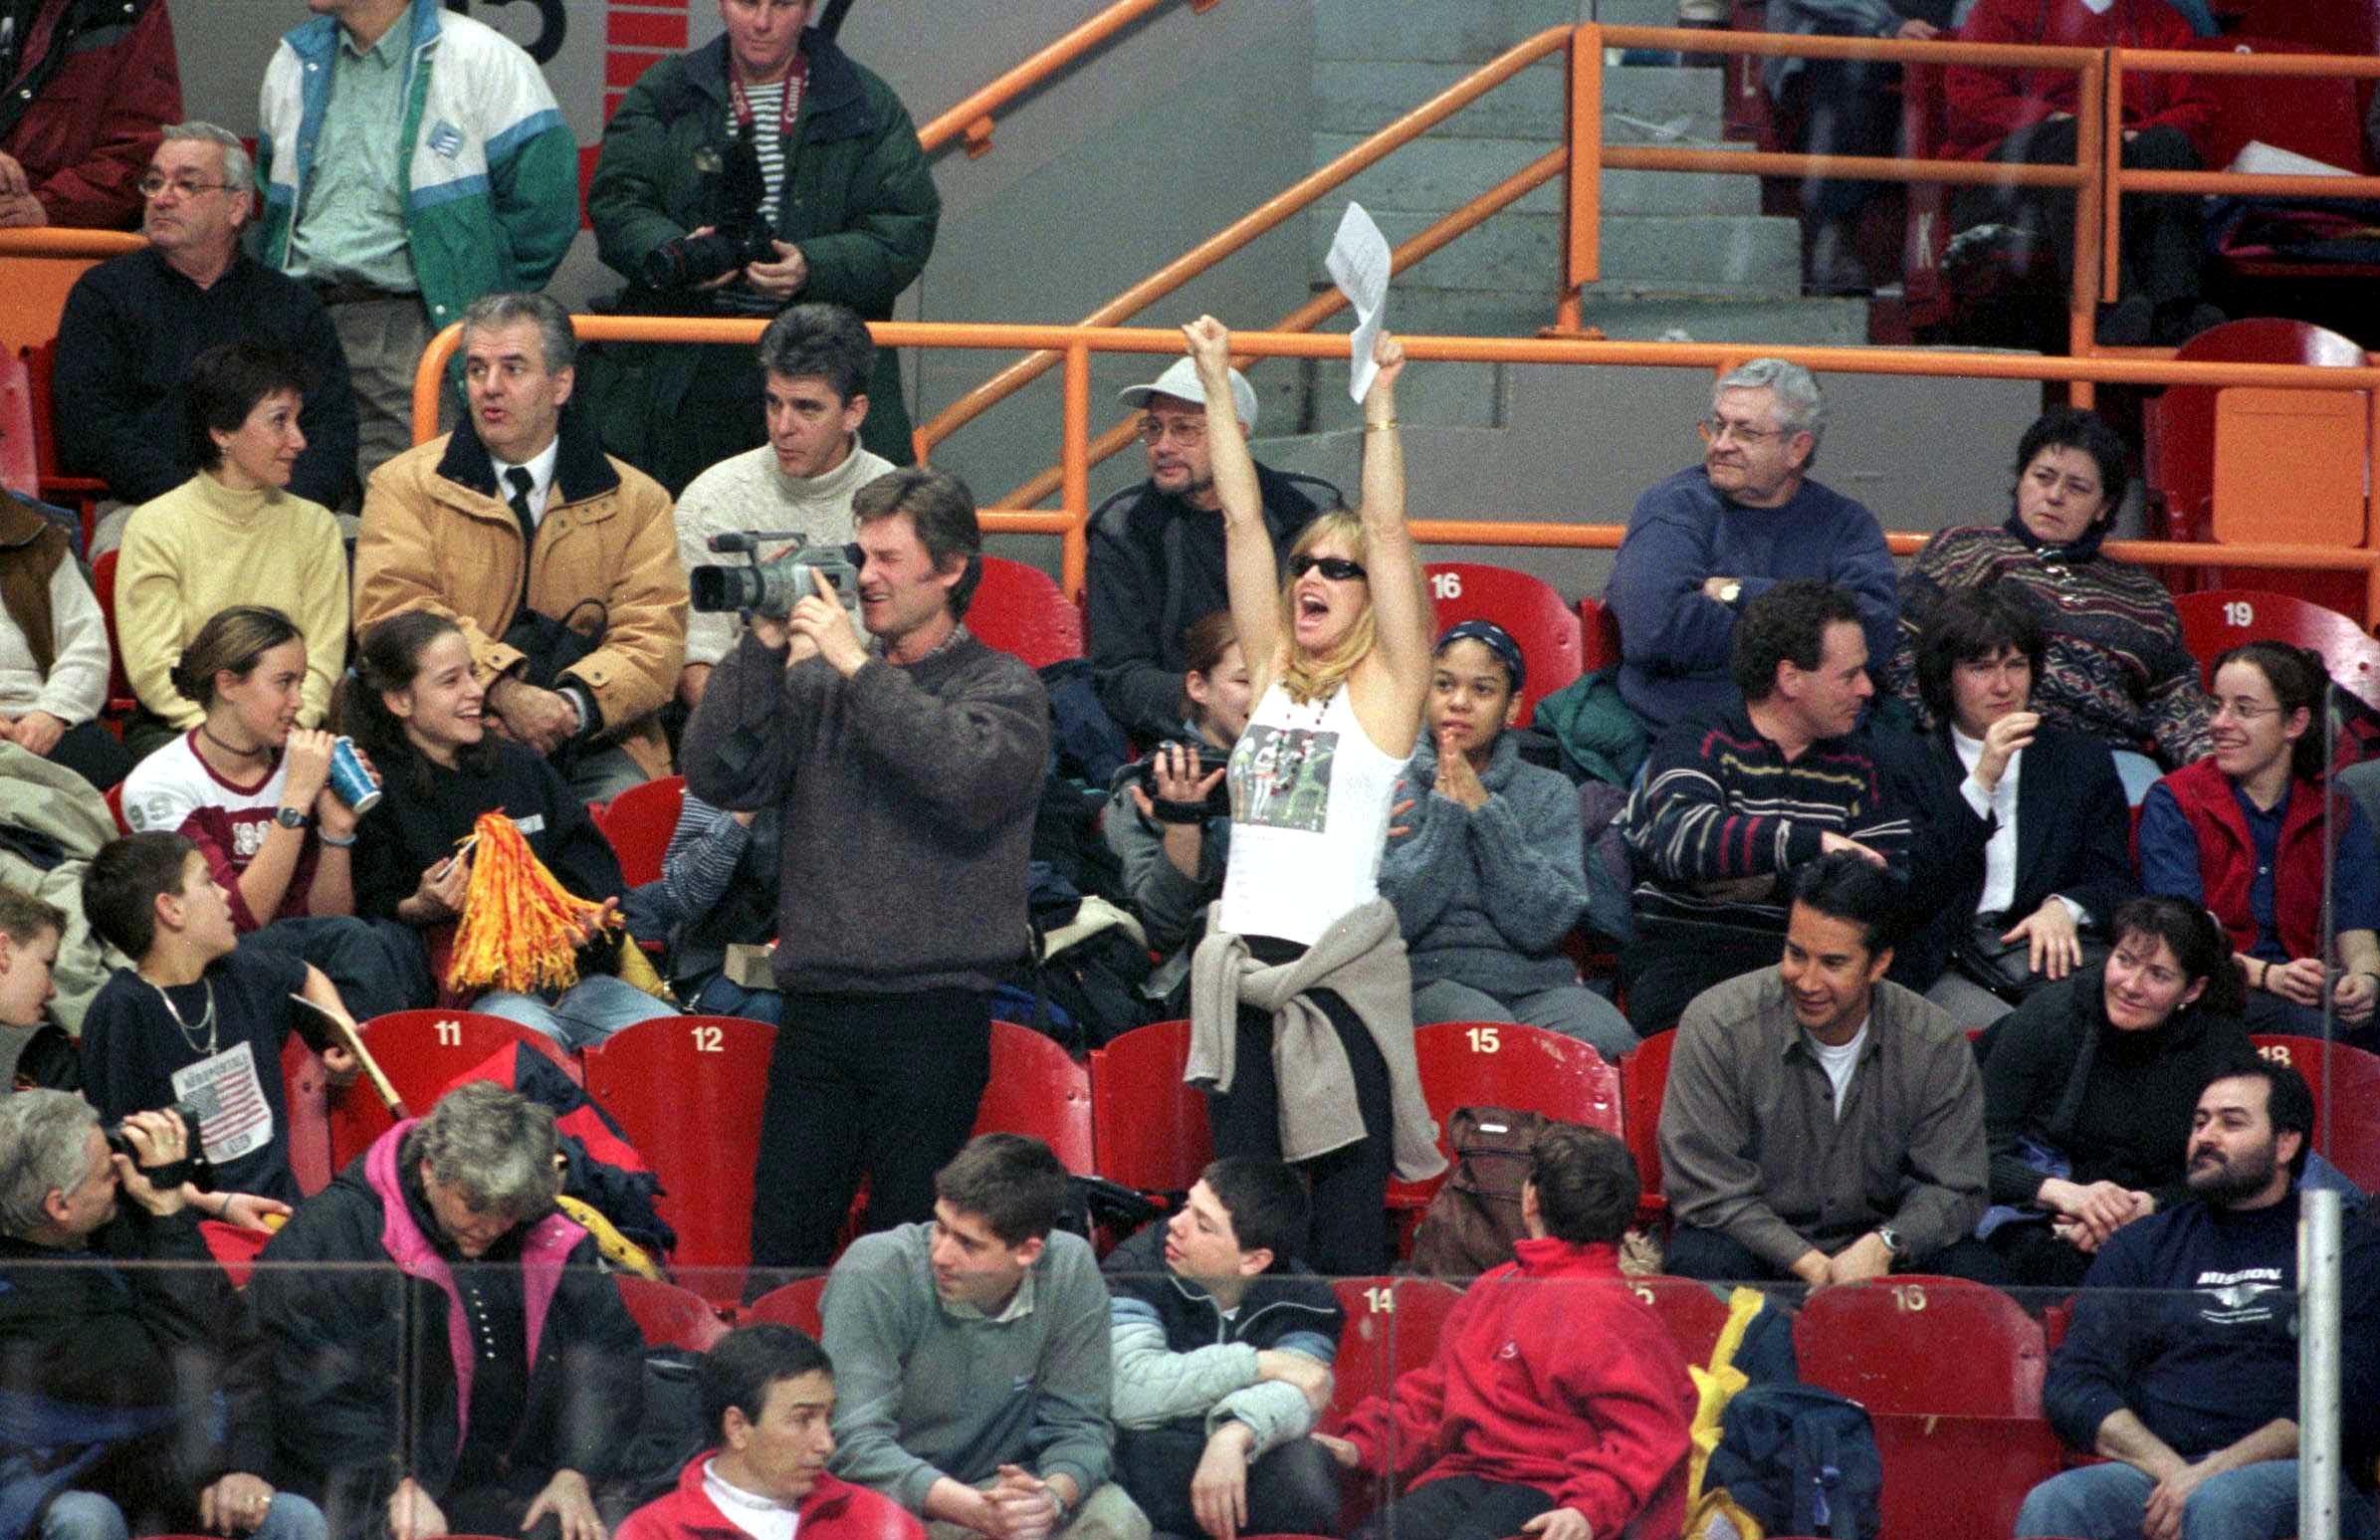 Kurt Russell and Goldie Hawn attending one of Wyatt's hockey games in Quebec, 2000 | Source: Getty Images